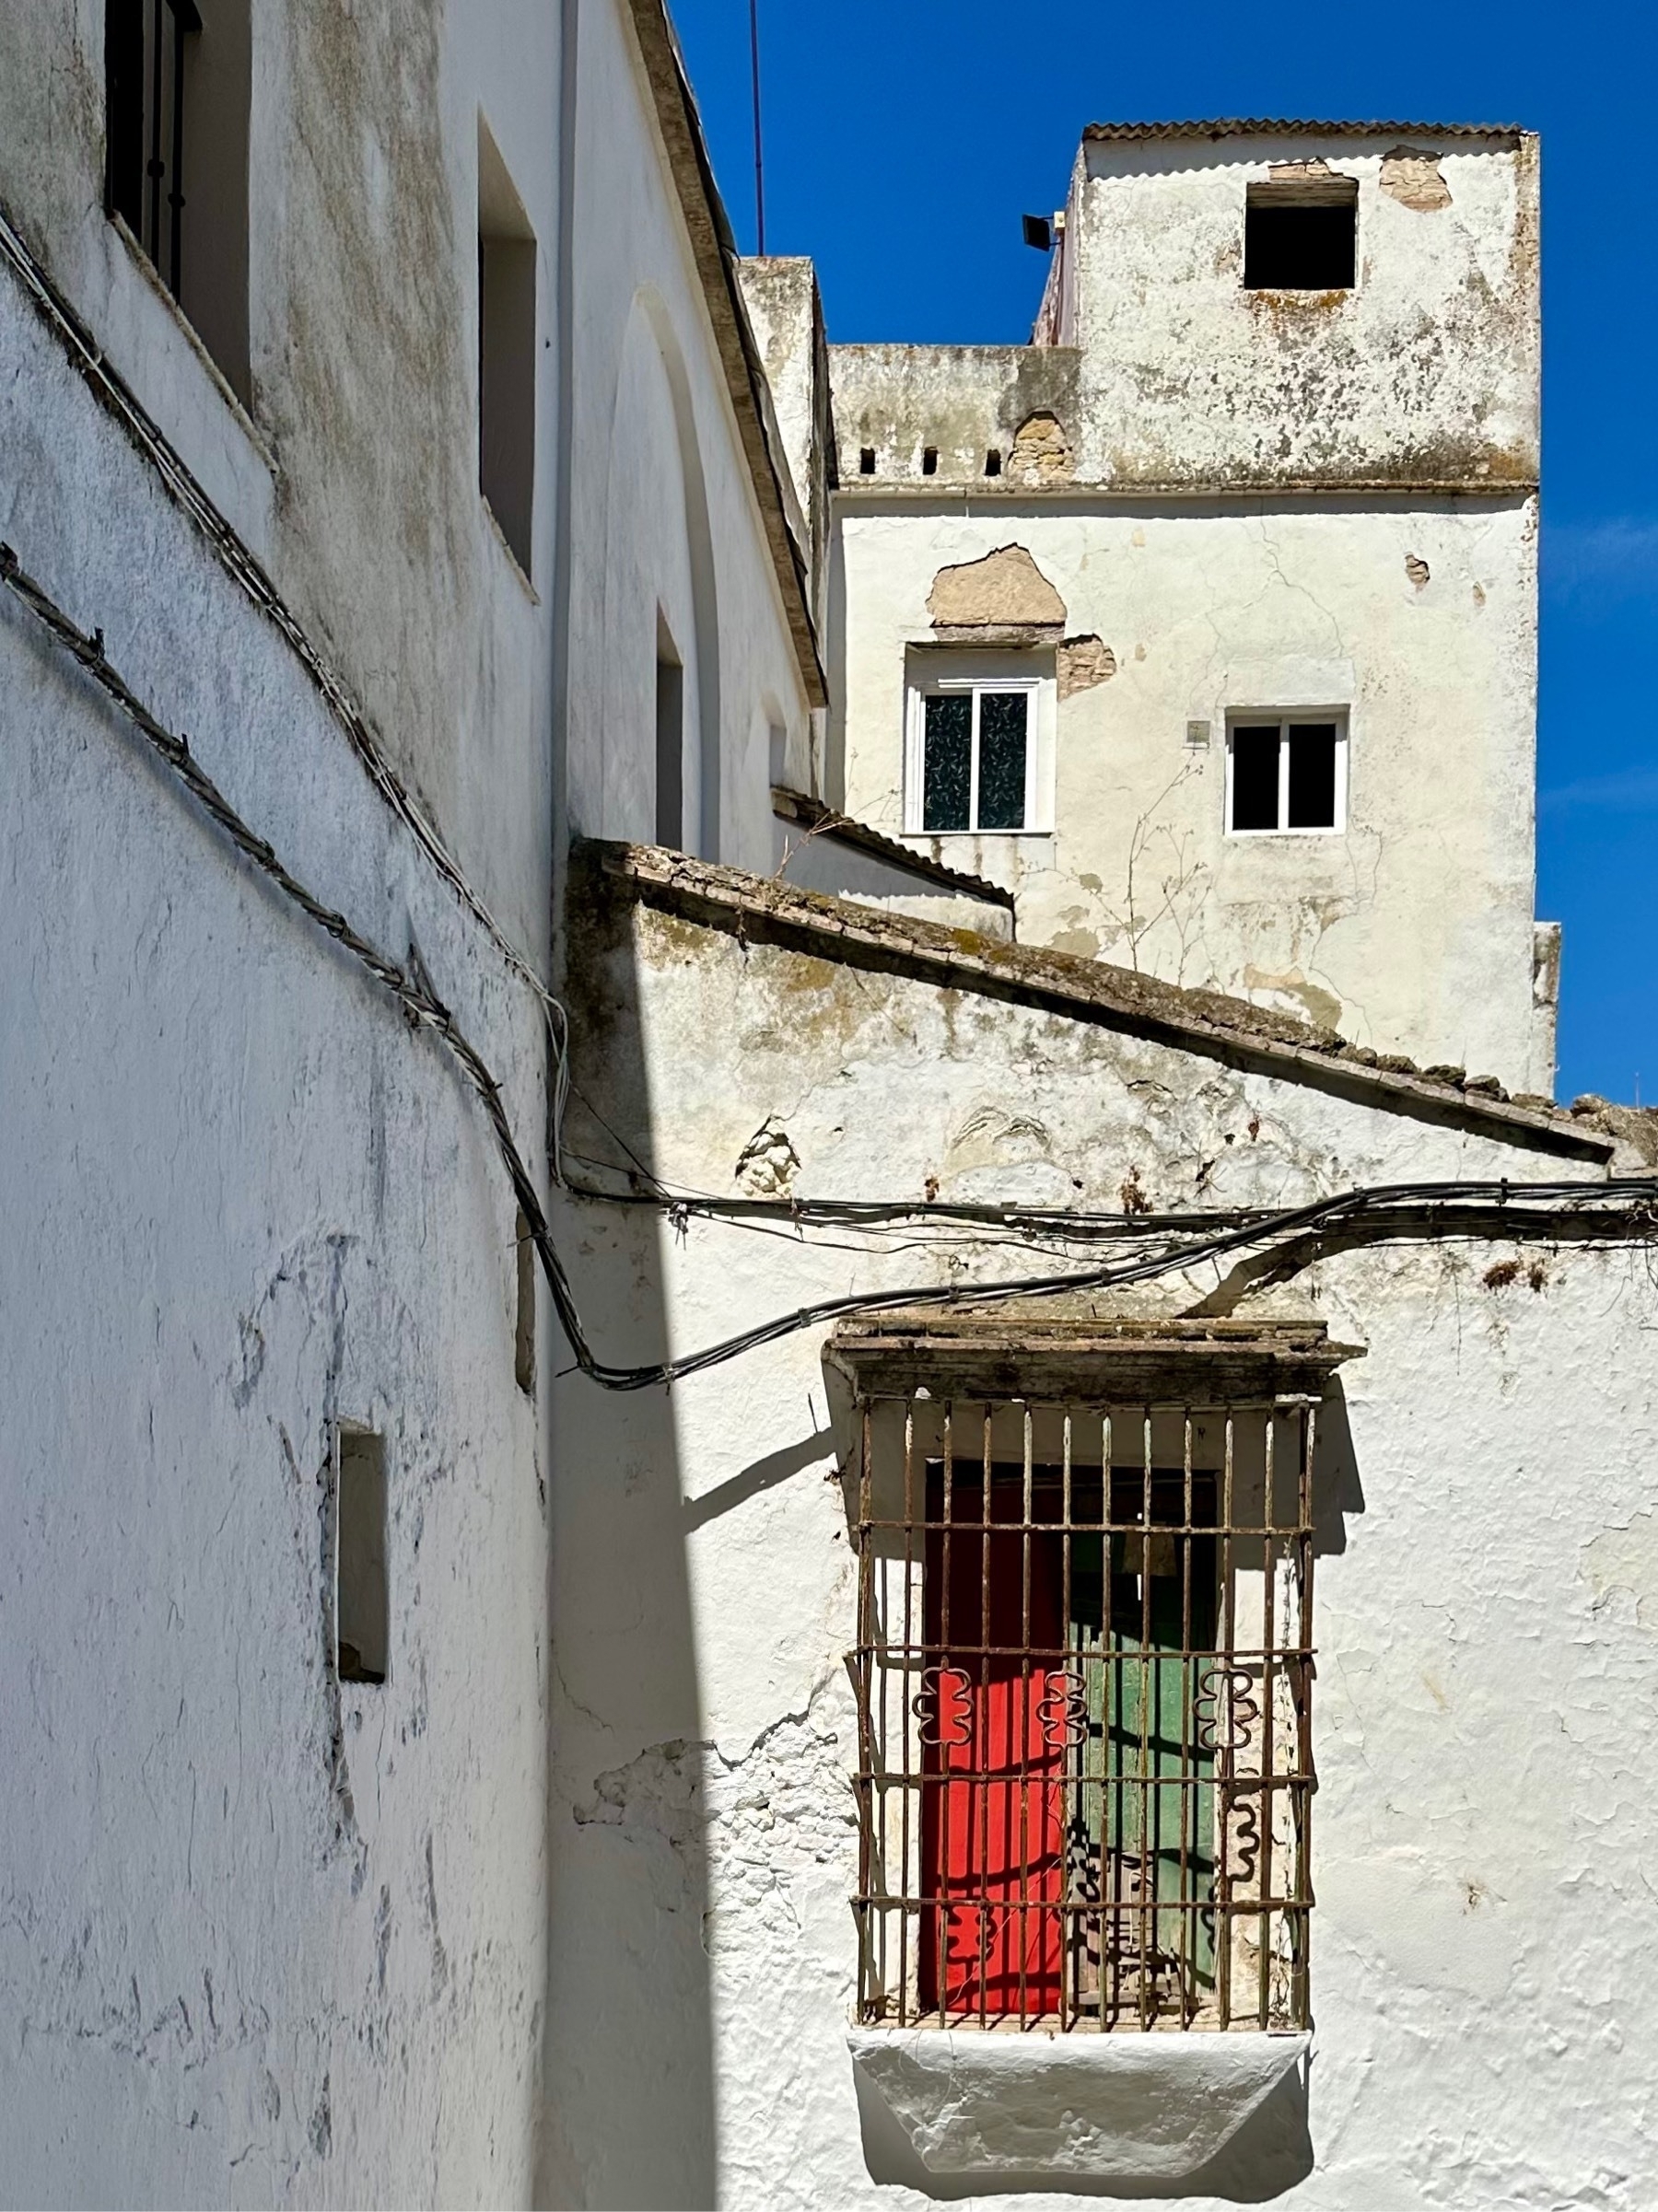 White 17th-century Hispanic buildings close up against a blue sky, one main window covered up with two wooden boards; one red on the left, and one green on the right.